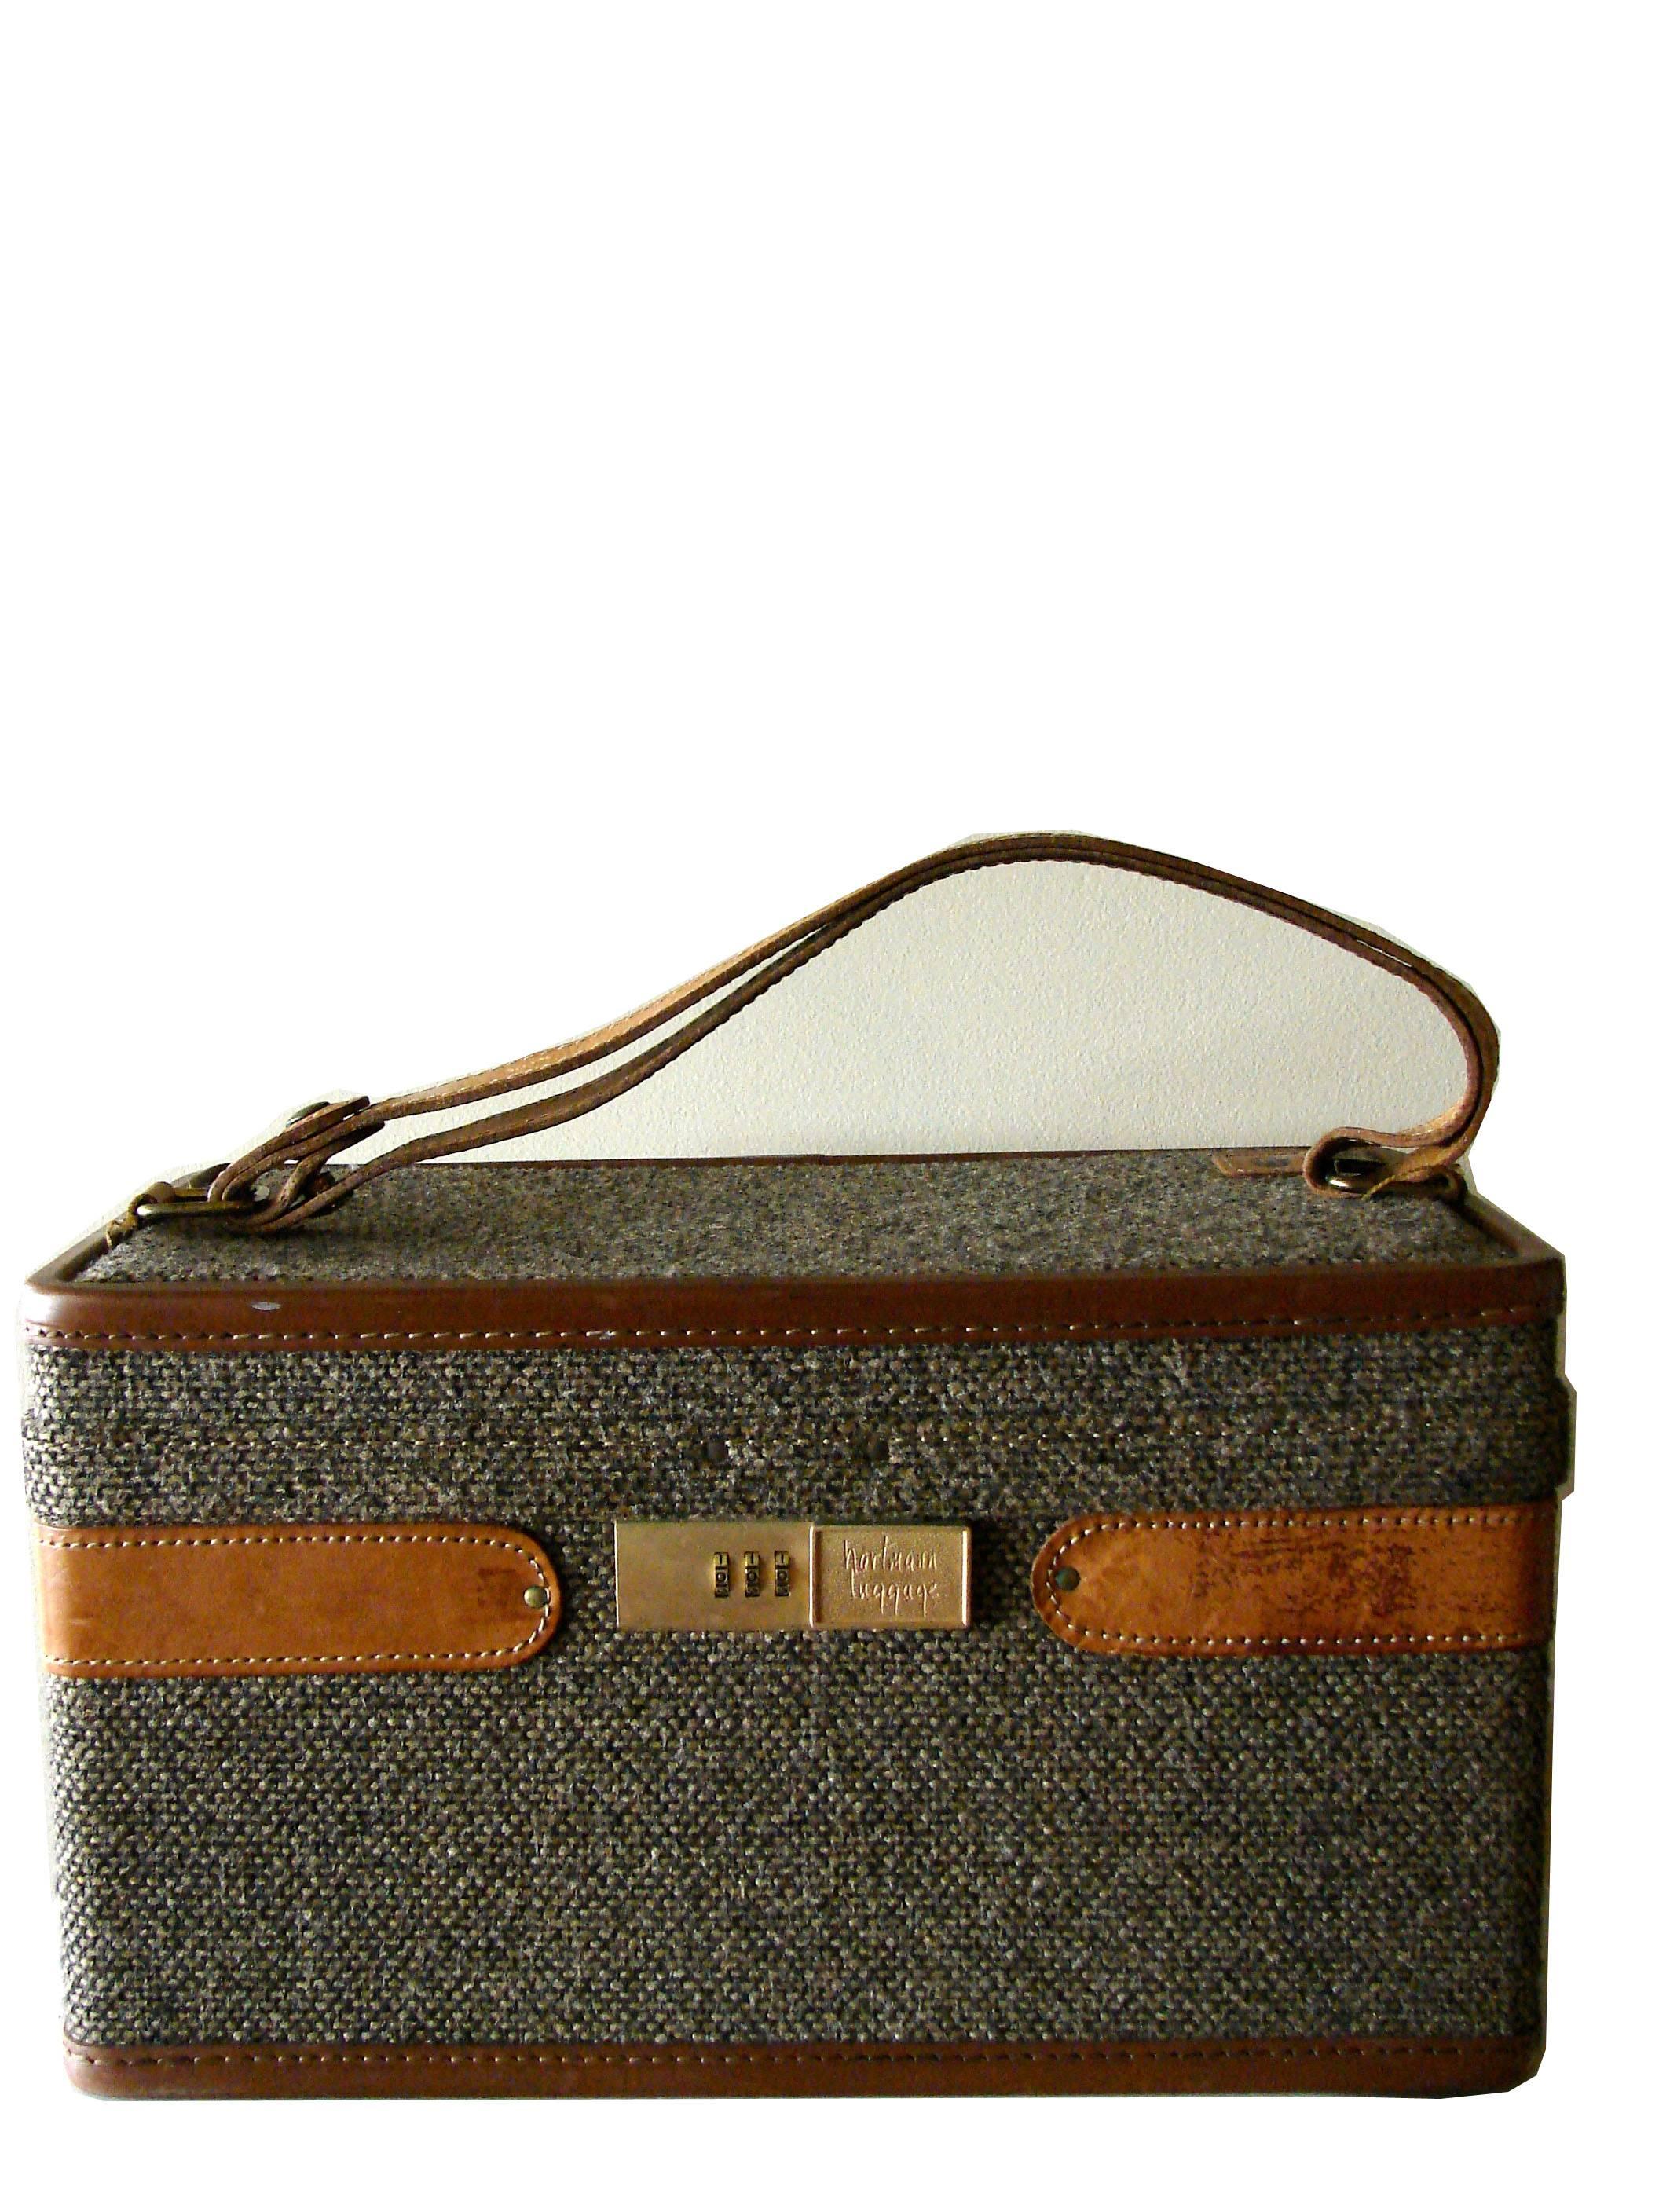 1970s Hartmann Tweed + Leather Train Case with Toile Lining + Adjustable Strap  1